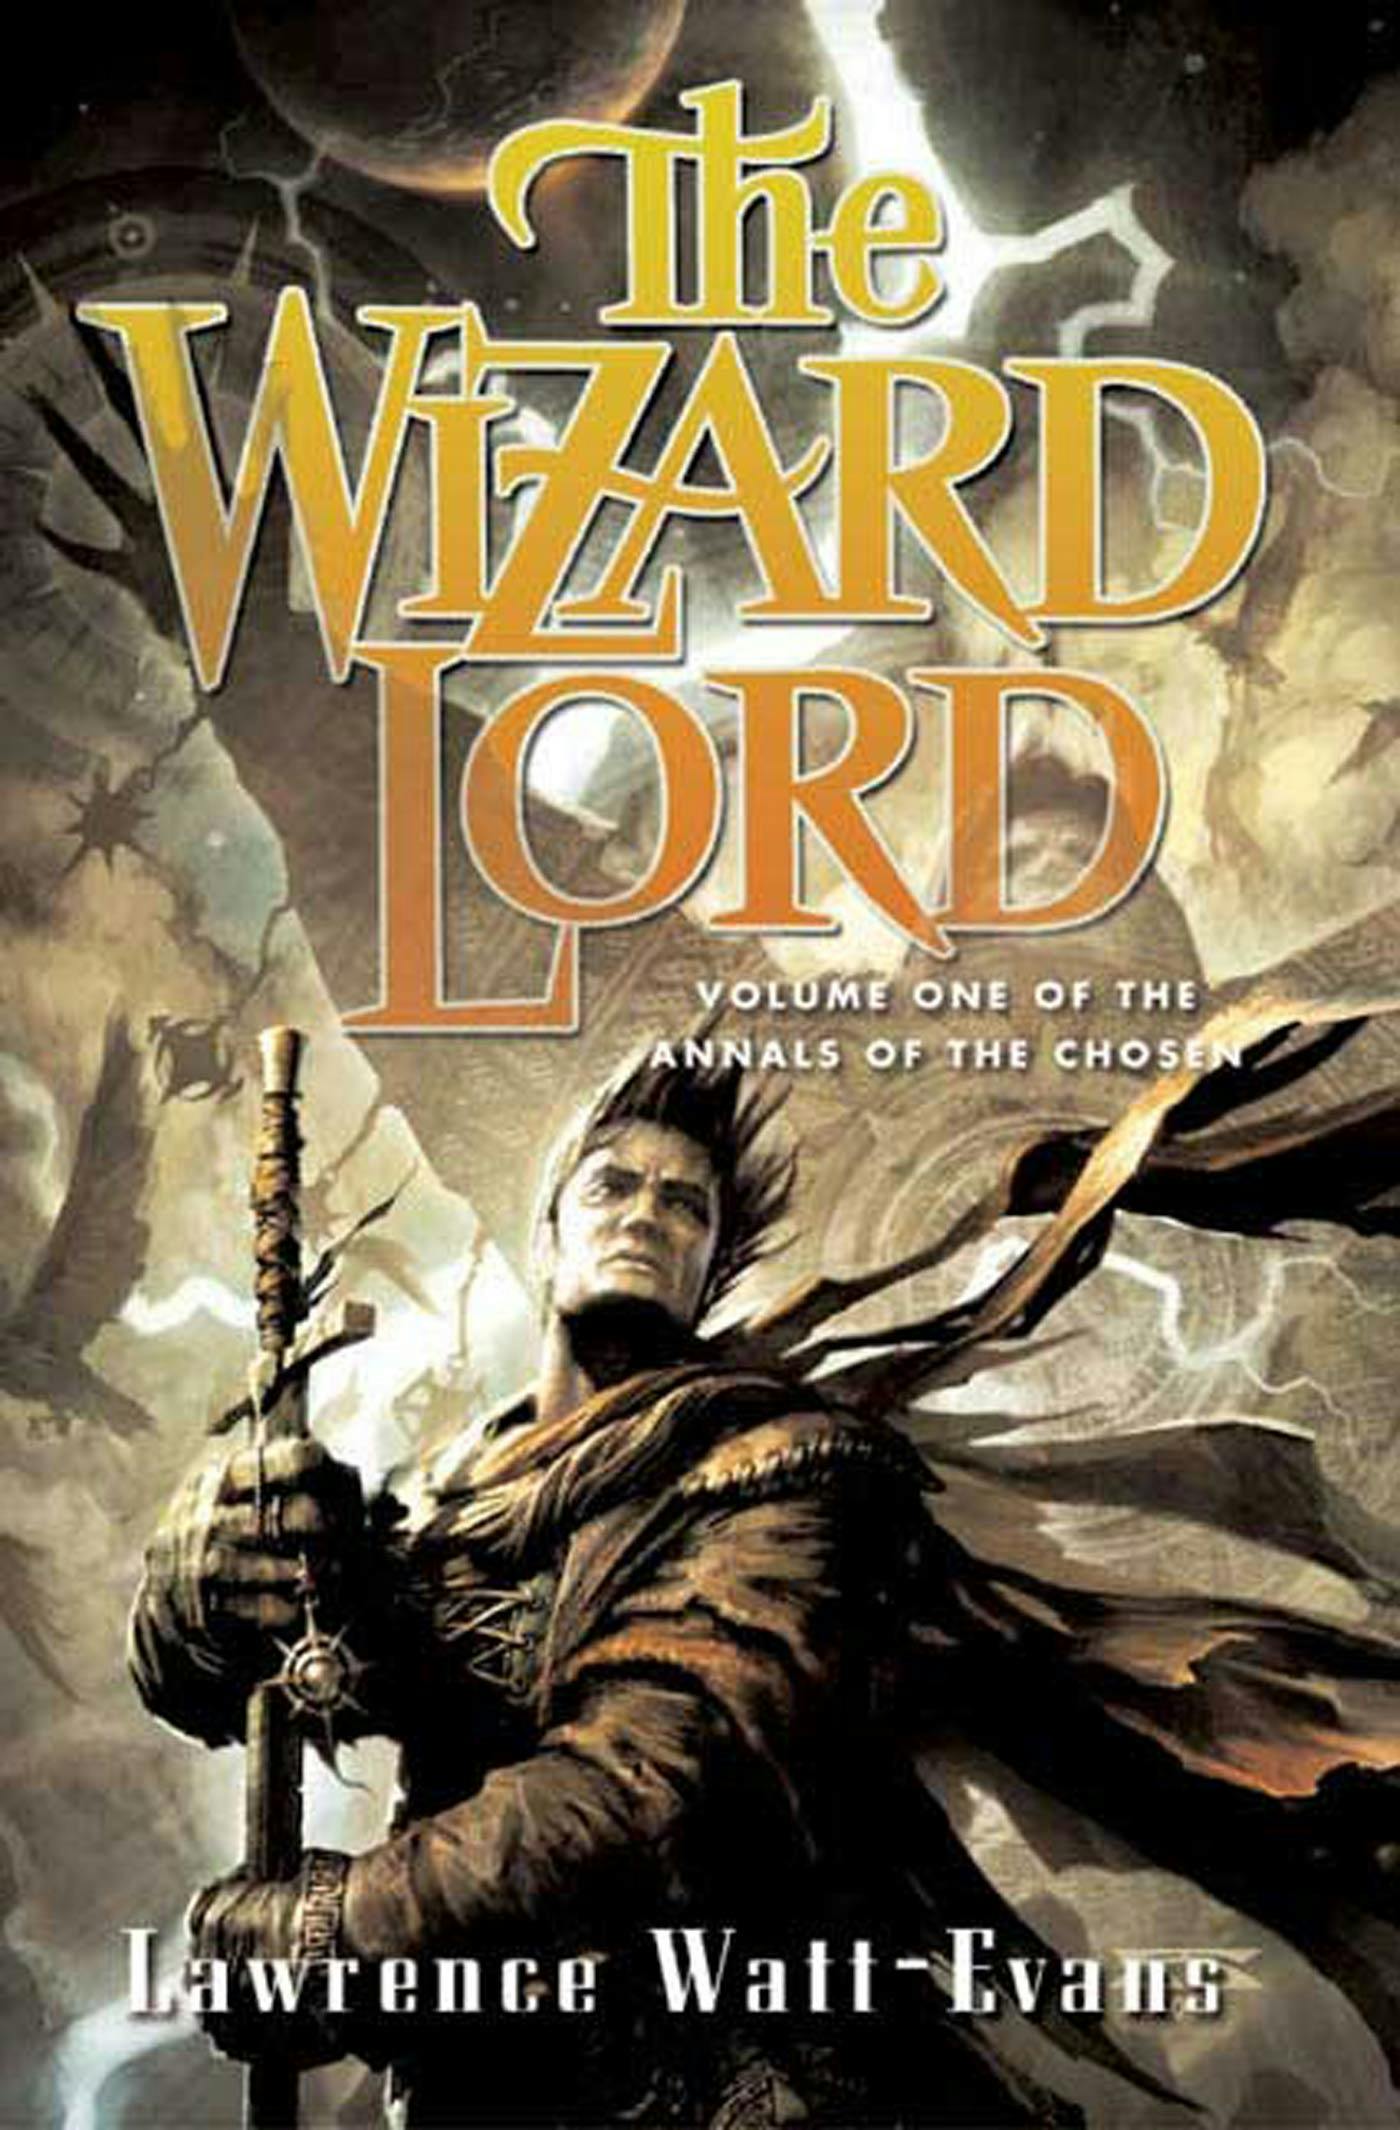 Cover for the book titled as: The Wizard Lord